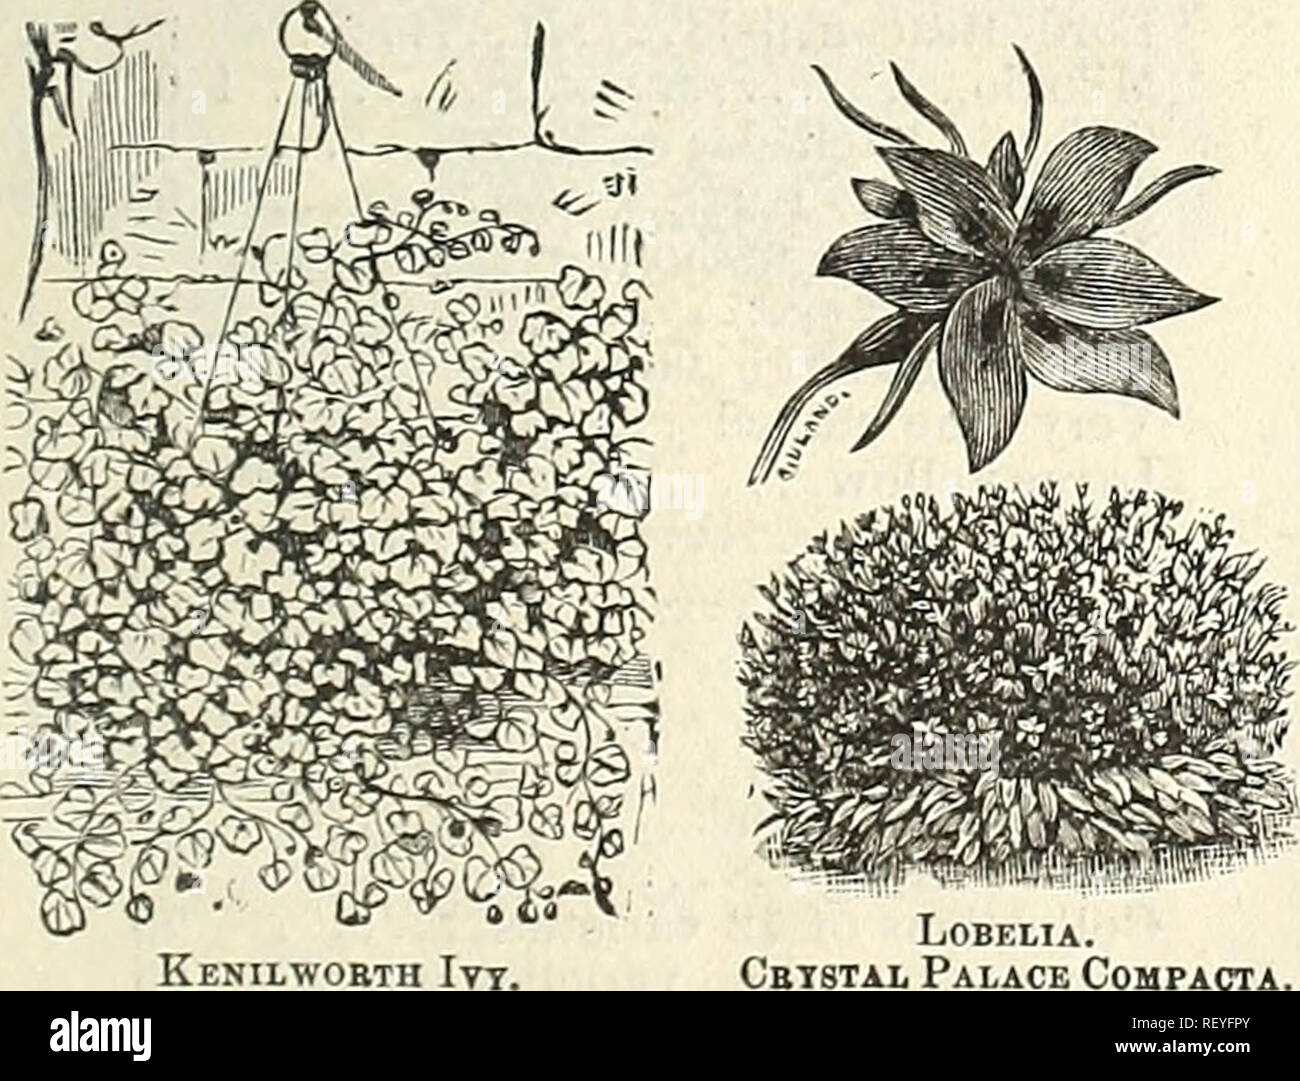 . Dreer's quarterly wholesale list for florists and market gardeners. Bulbs (Plants) Catalogs; Flowers Seeds Catalogs; Vegetables Seeds Catalogs; Nurseries (Horticulture) Catalogs. Gl.OXINA—Grandiflora. Hollyhock—Chater's Superb Trade Gloxinia crassifolia, choice mixed $ £ trade pkt. 45 new spotted and tigered Gomphrena, mixed Helichrysum, (Ekerlasting) Heliotrope, Impatiens Sultani, (new), £ trade 45 Lucy Kenilworthlvy, Linaria cymbalaria Hollyhock, extra double mixed extra double red &quot; pink '* &quot; white &quot; yellow Humulus Japonicus, (Jap. Hop.).. Ice Plant, (Mesembryanthemum) ikt. Stock Photo